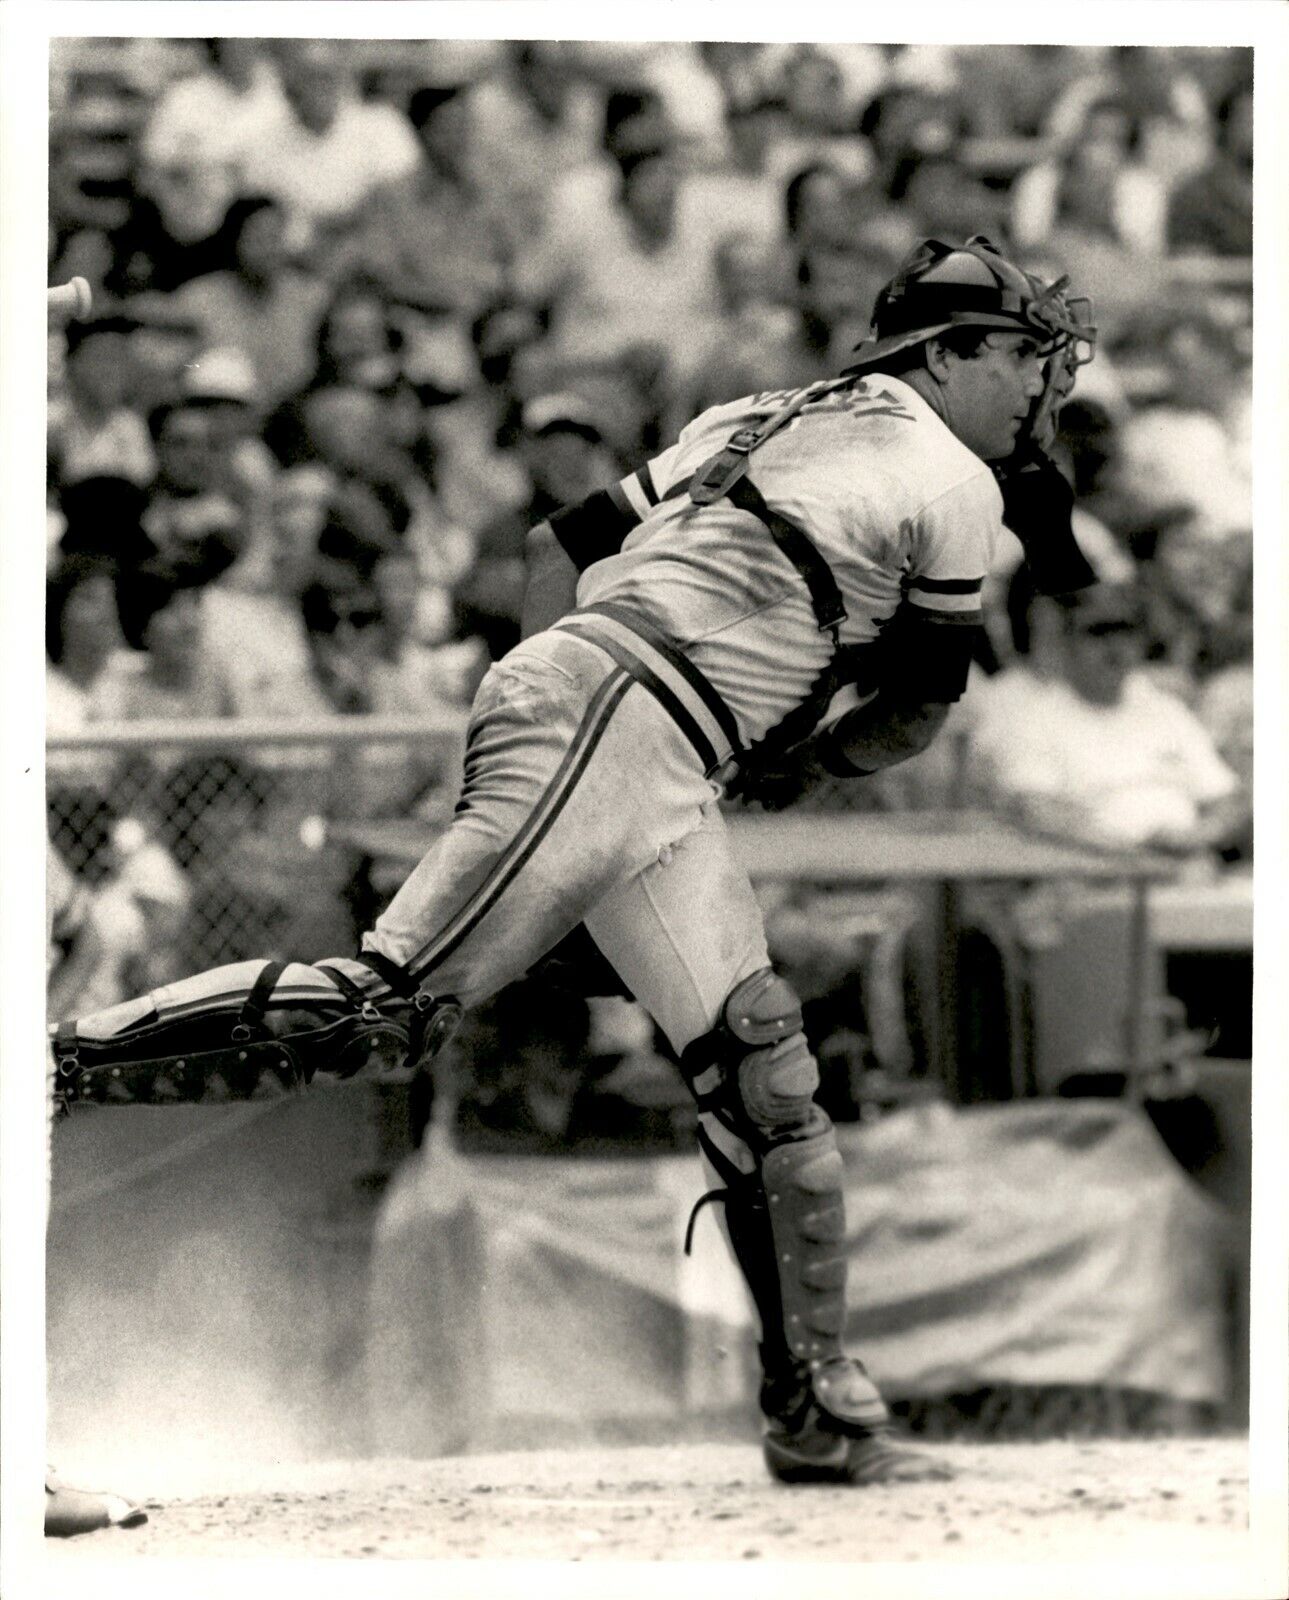 LG934 1982 Original Malcolm Emmons Photo RON HASSEY Cleveland Indians Catcher